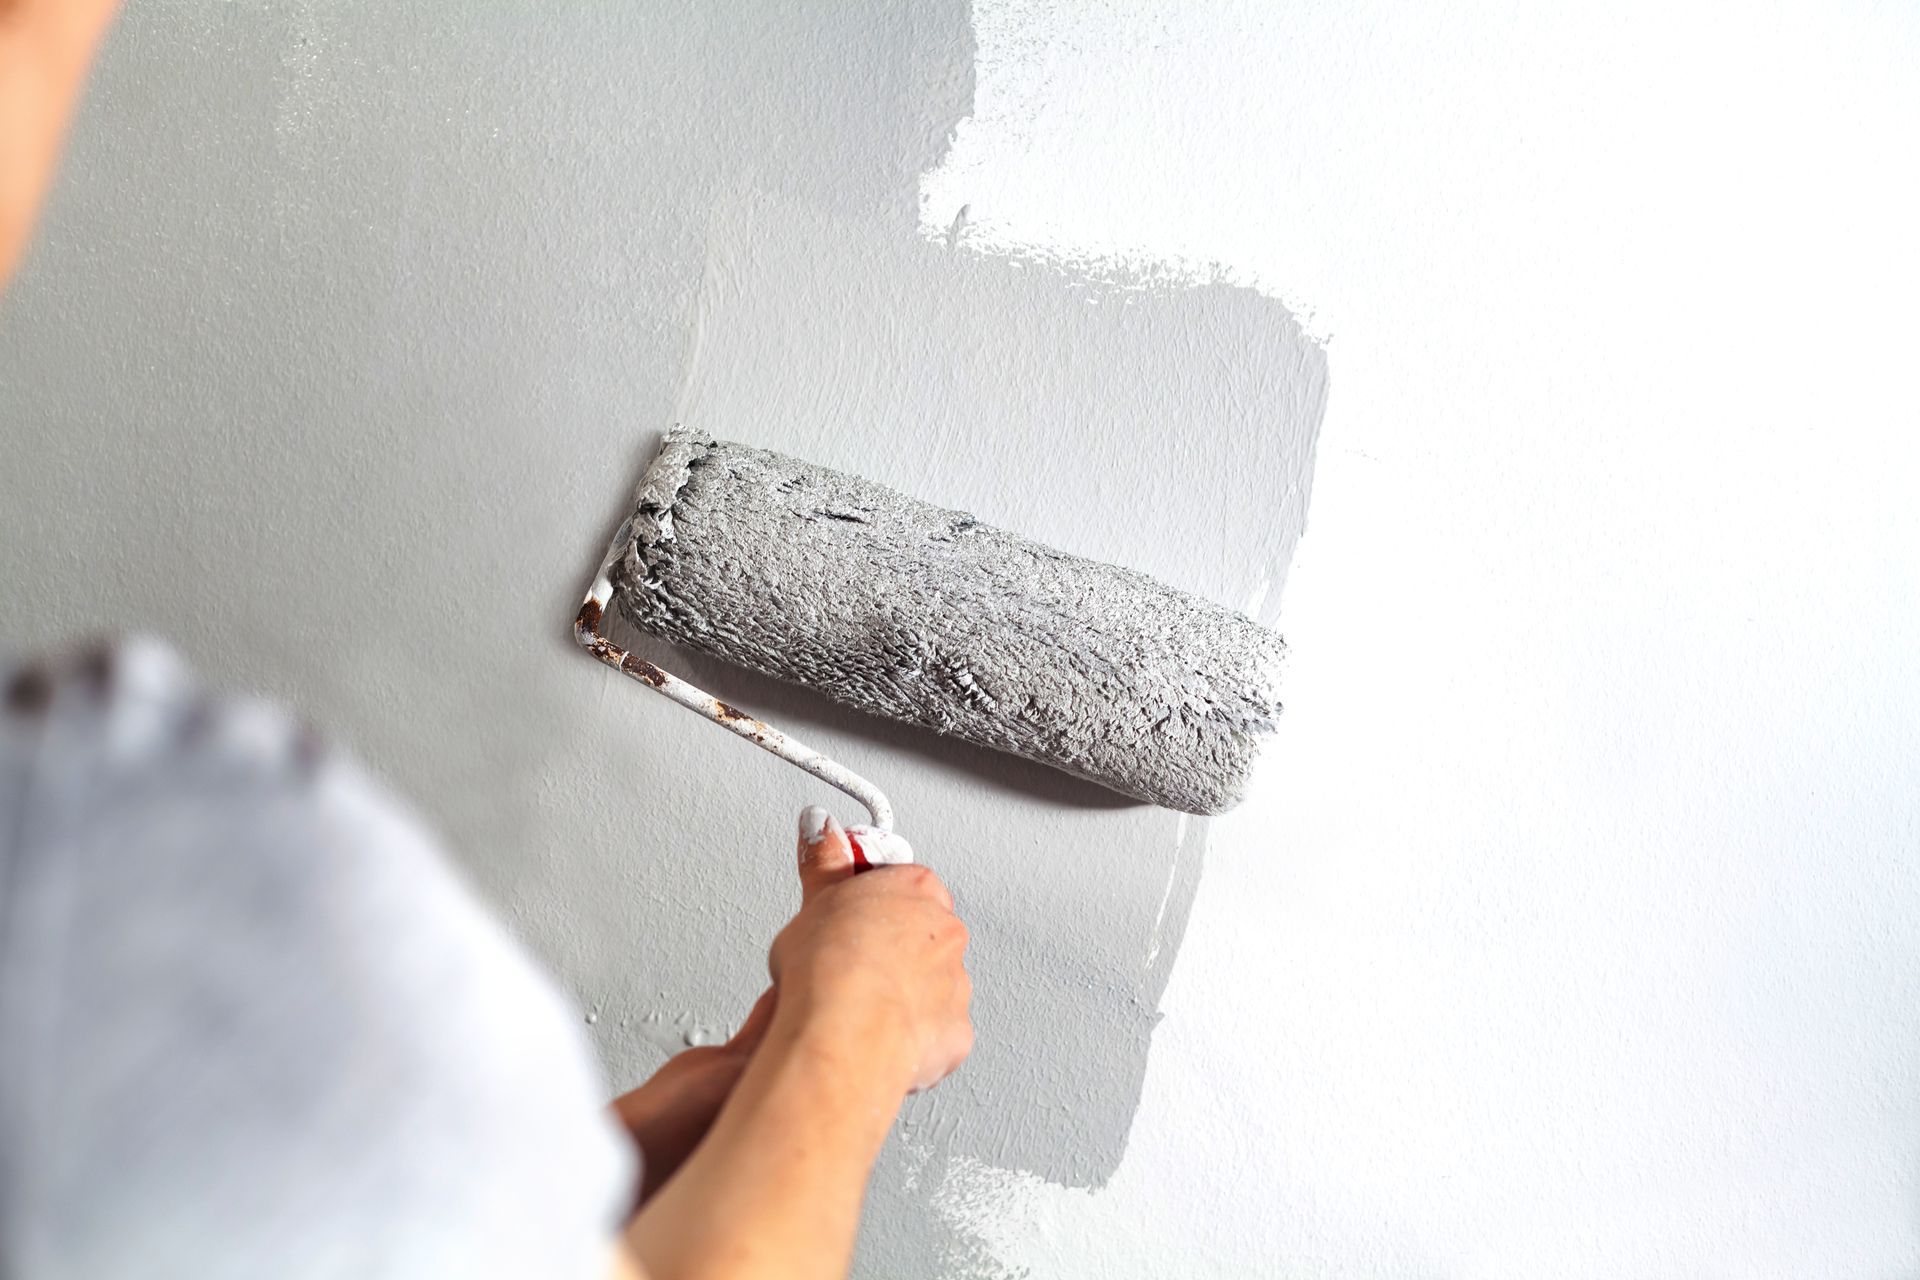 A person is painting a wall with a paint roller.